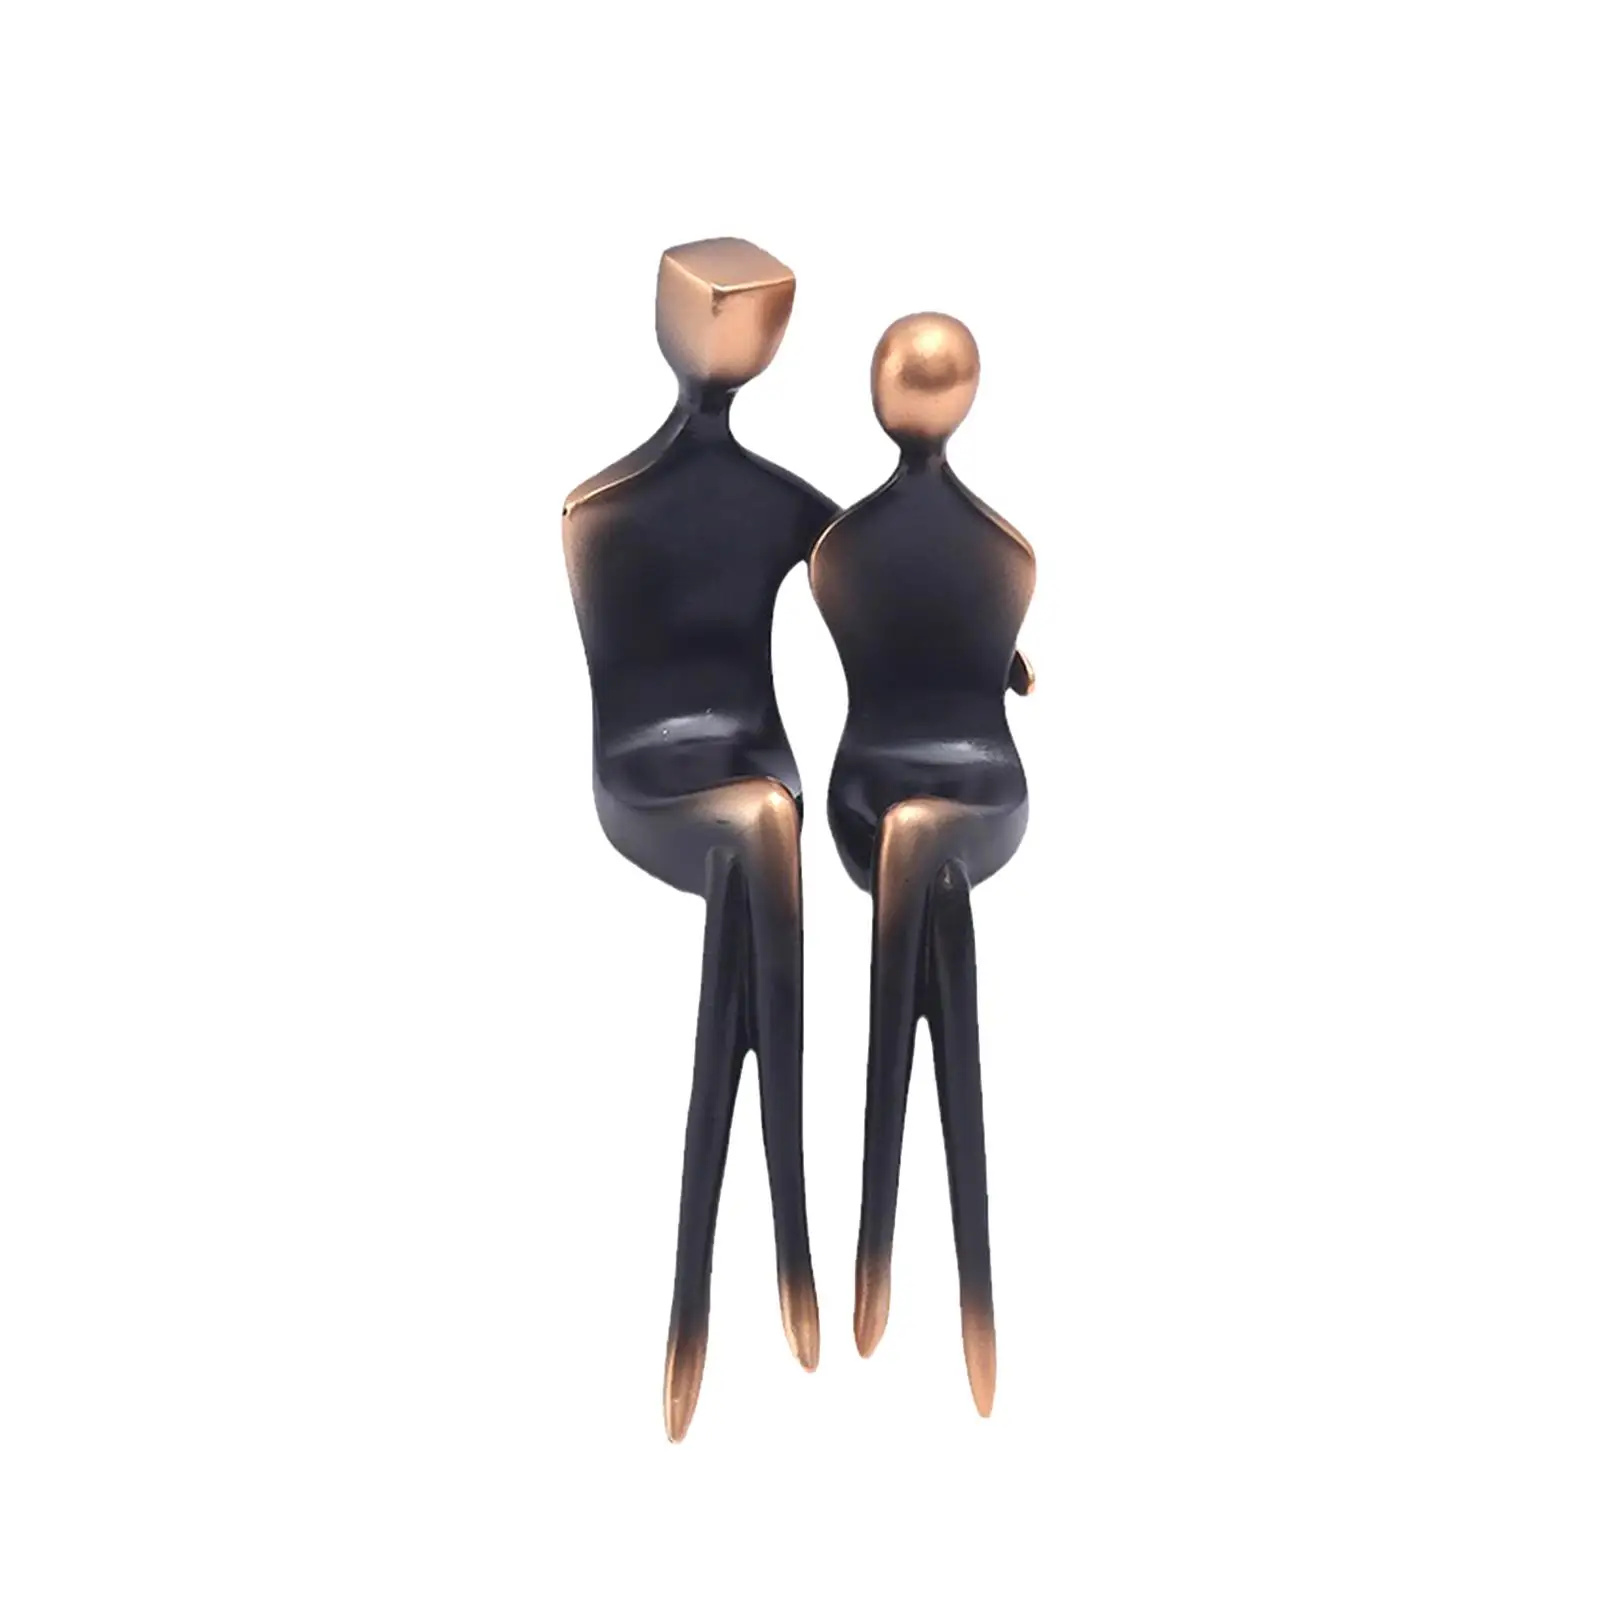 Abstract Figurine Artistic Decorative Modern Collectible Couple Sculpture Resin Statue for Tabletop Office Shelf Cabinet Decor